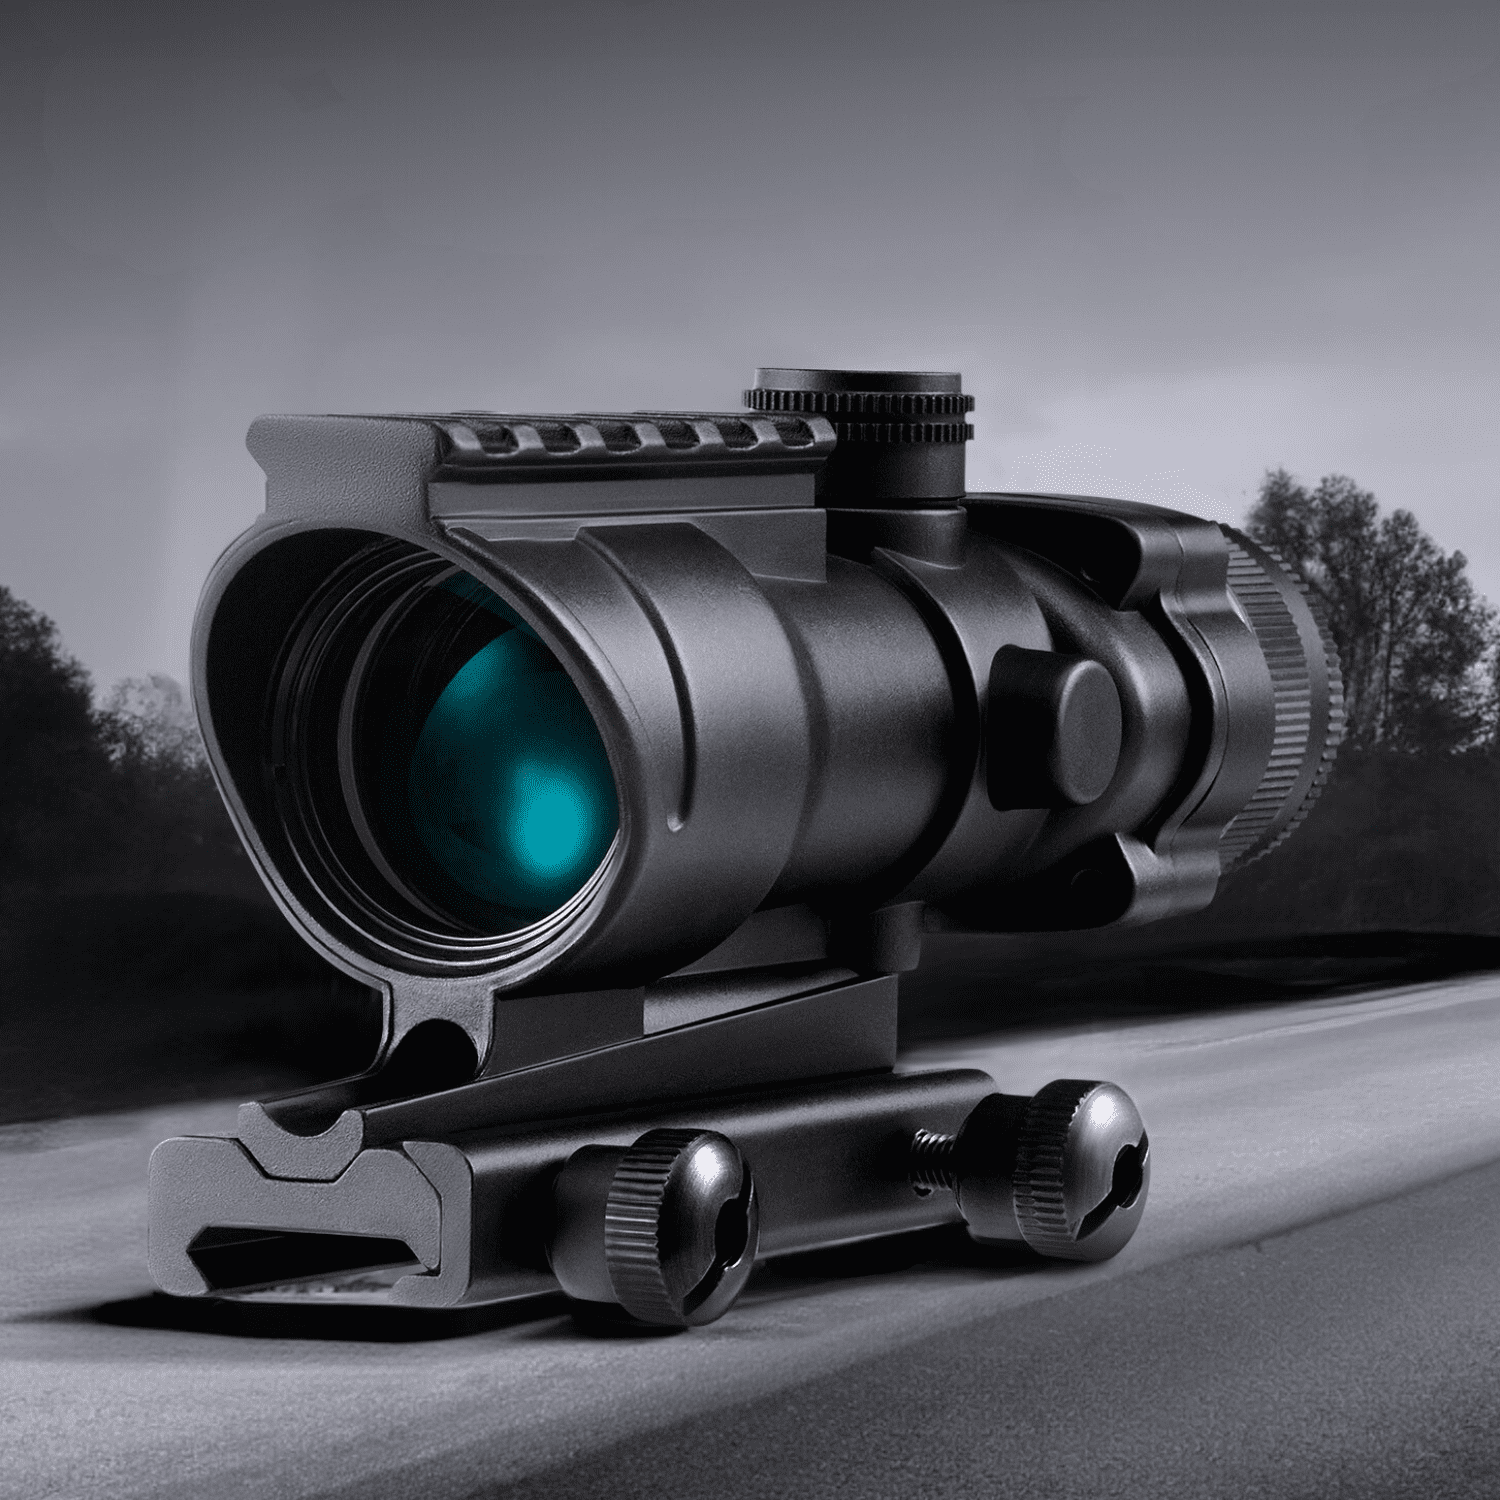 【BUY 1 GET 1 FREE GIFT】4x32 Tactical Rifle Scope with True Fiber Optic Red Illuminated Crosshair & Picatinny Rail on Top